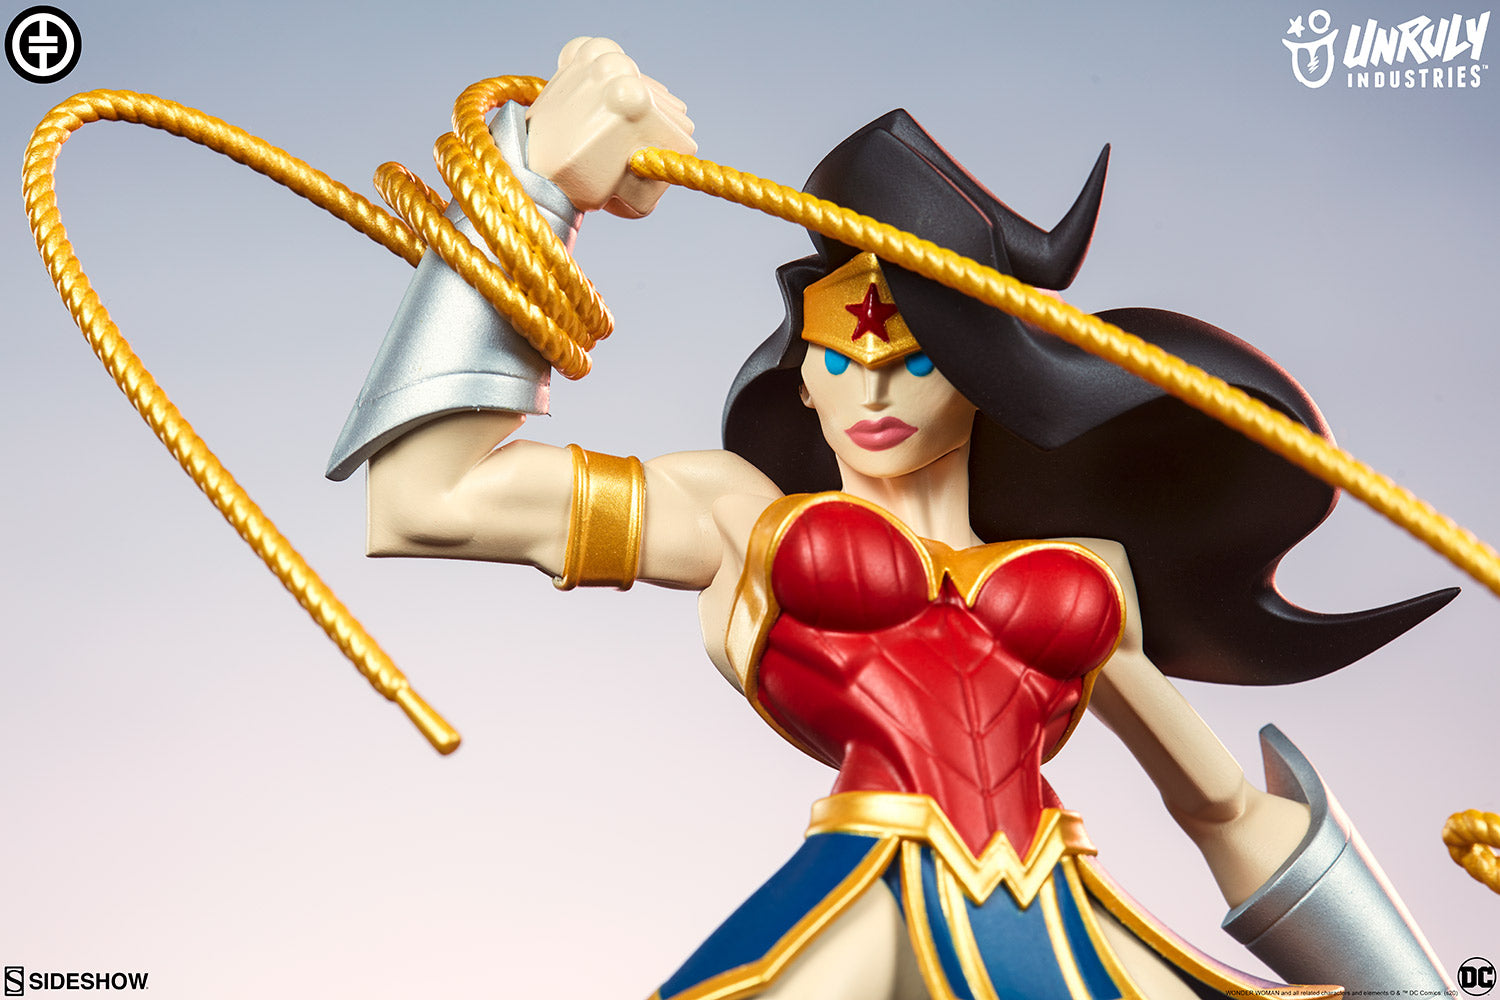 Sideshow Collectibles - Unruly Industries - Wonder Woman - Marvelous Toys